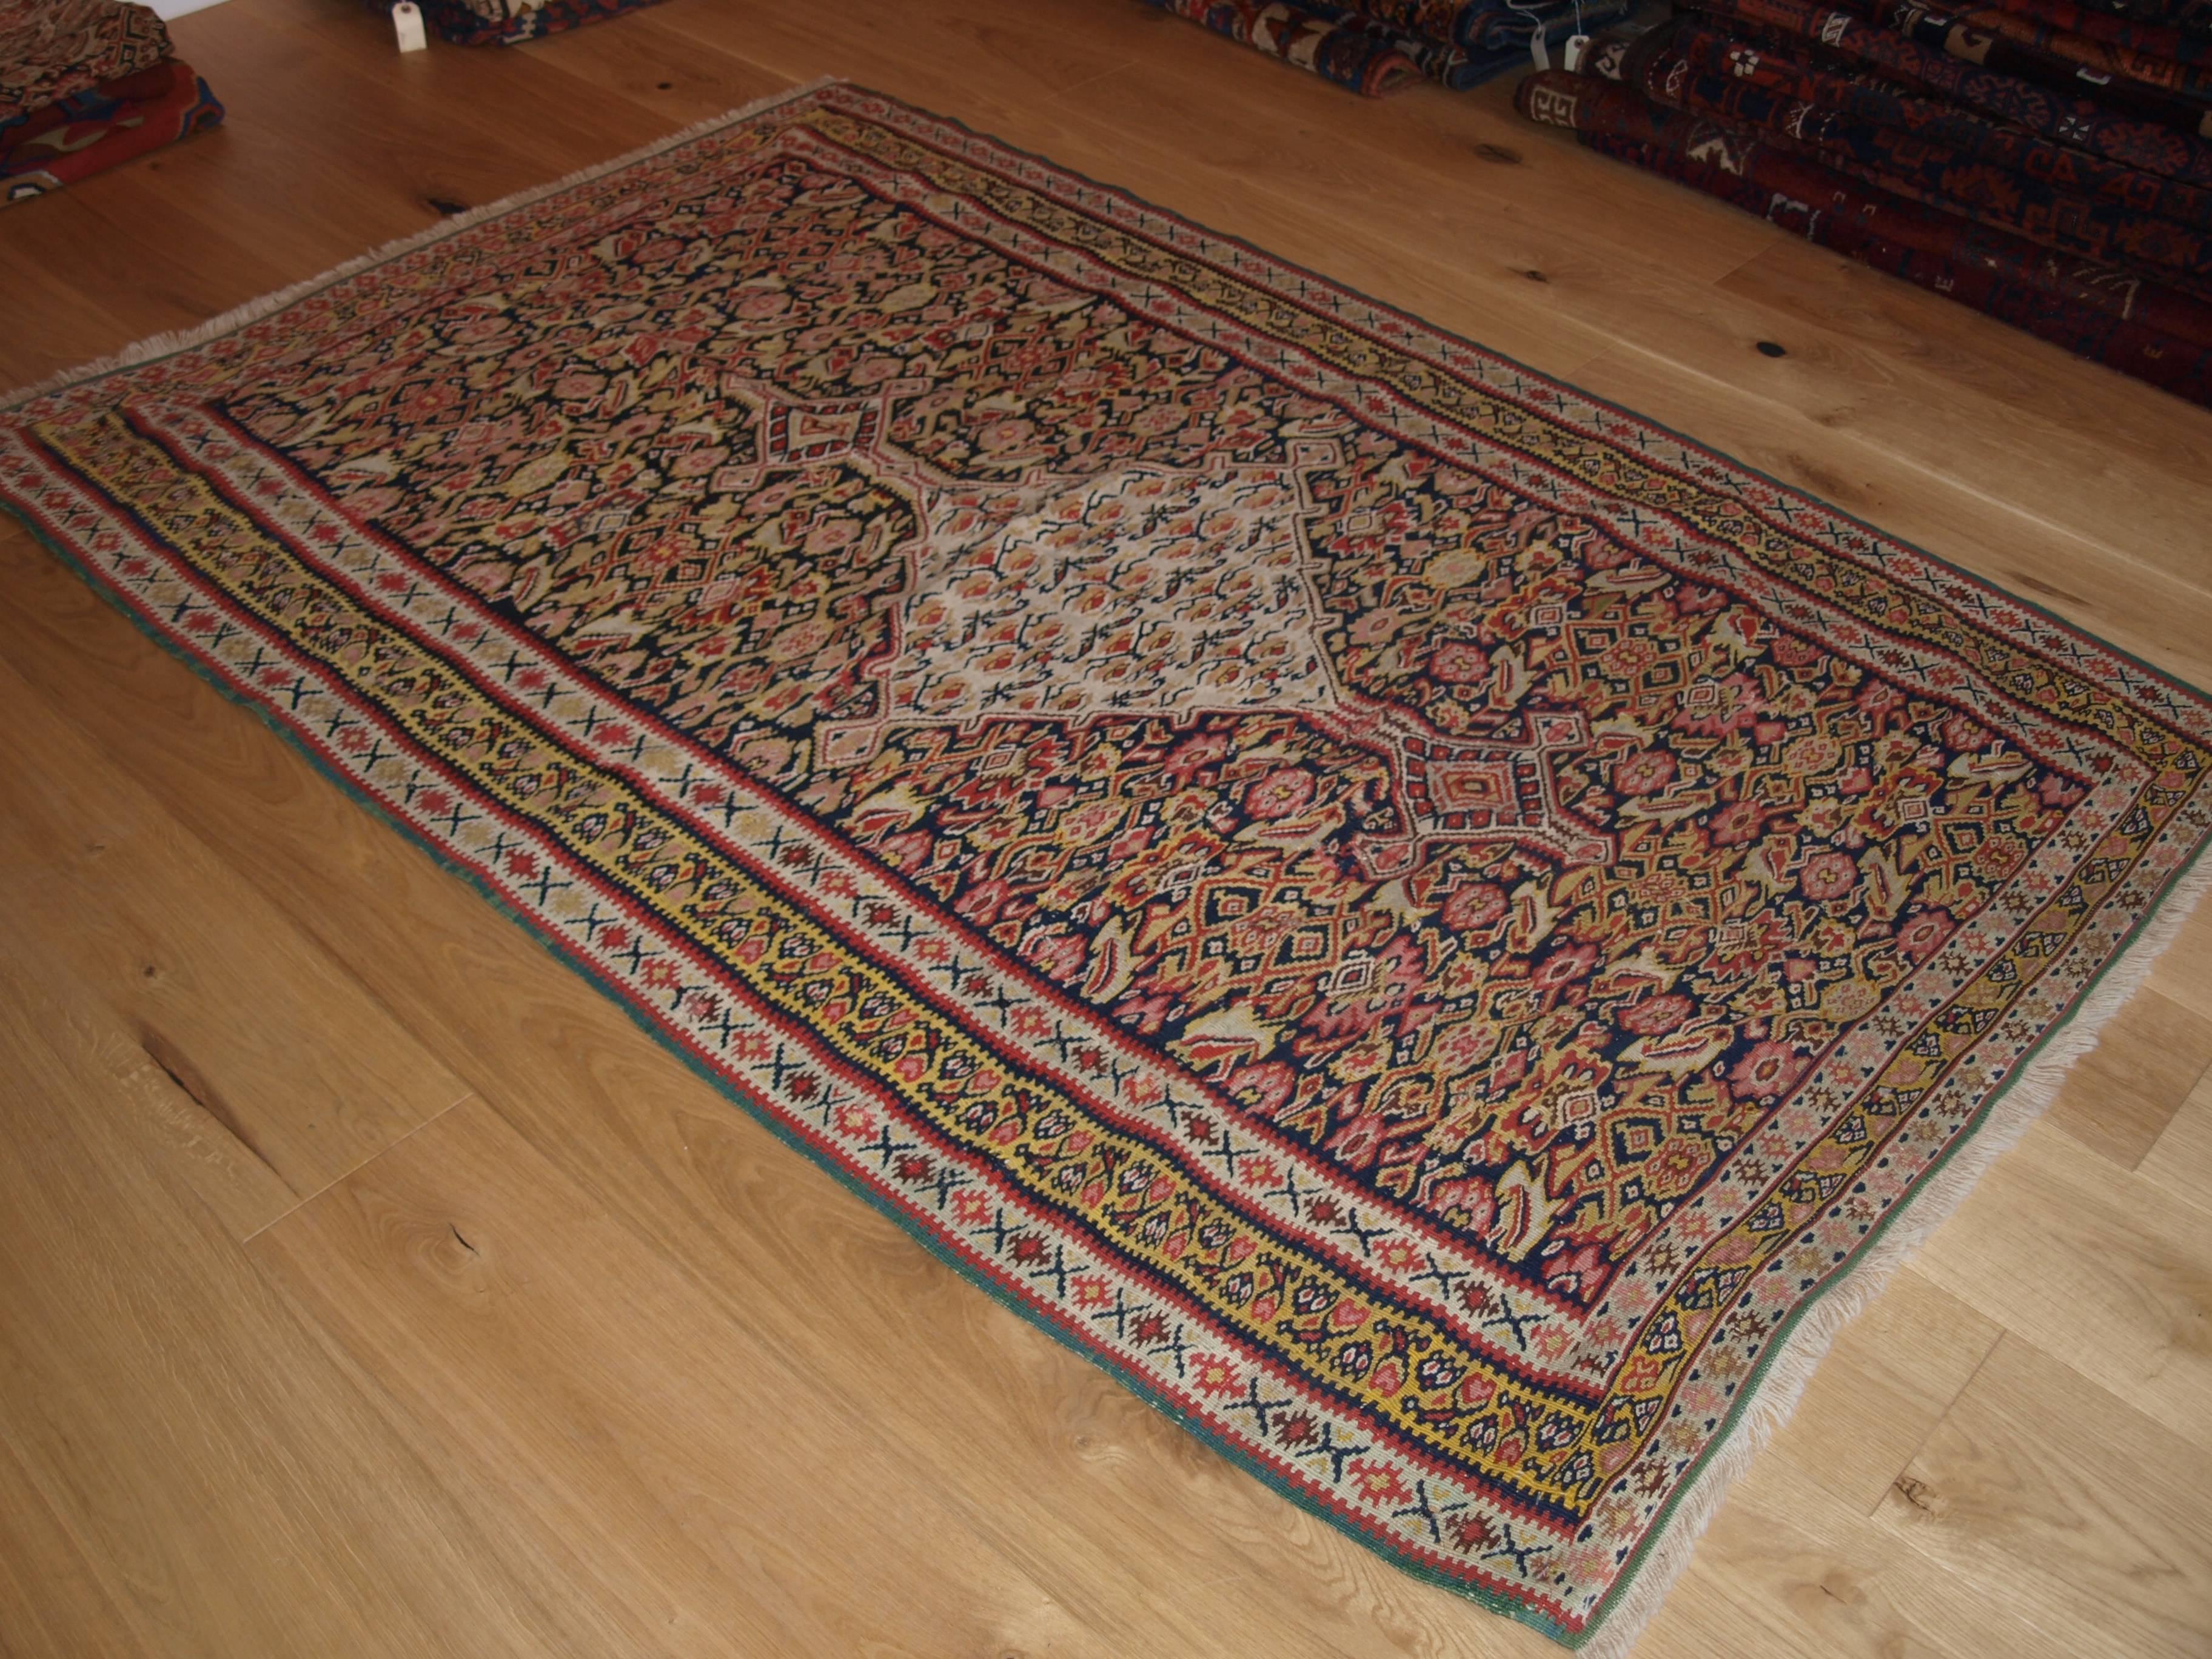 Size: 6ft 5in x 3ft 11in (196 x 120cm).
A fine Persian Senneh Kilim with soft colors and a traditional medallion design,
circa 1900.
This is a good Senneh Kilim with the overall design being the Classic Heratti design which is found in most